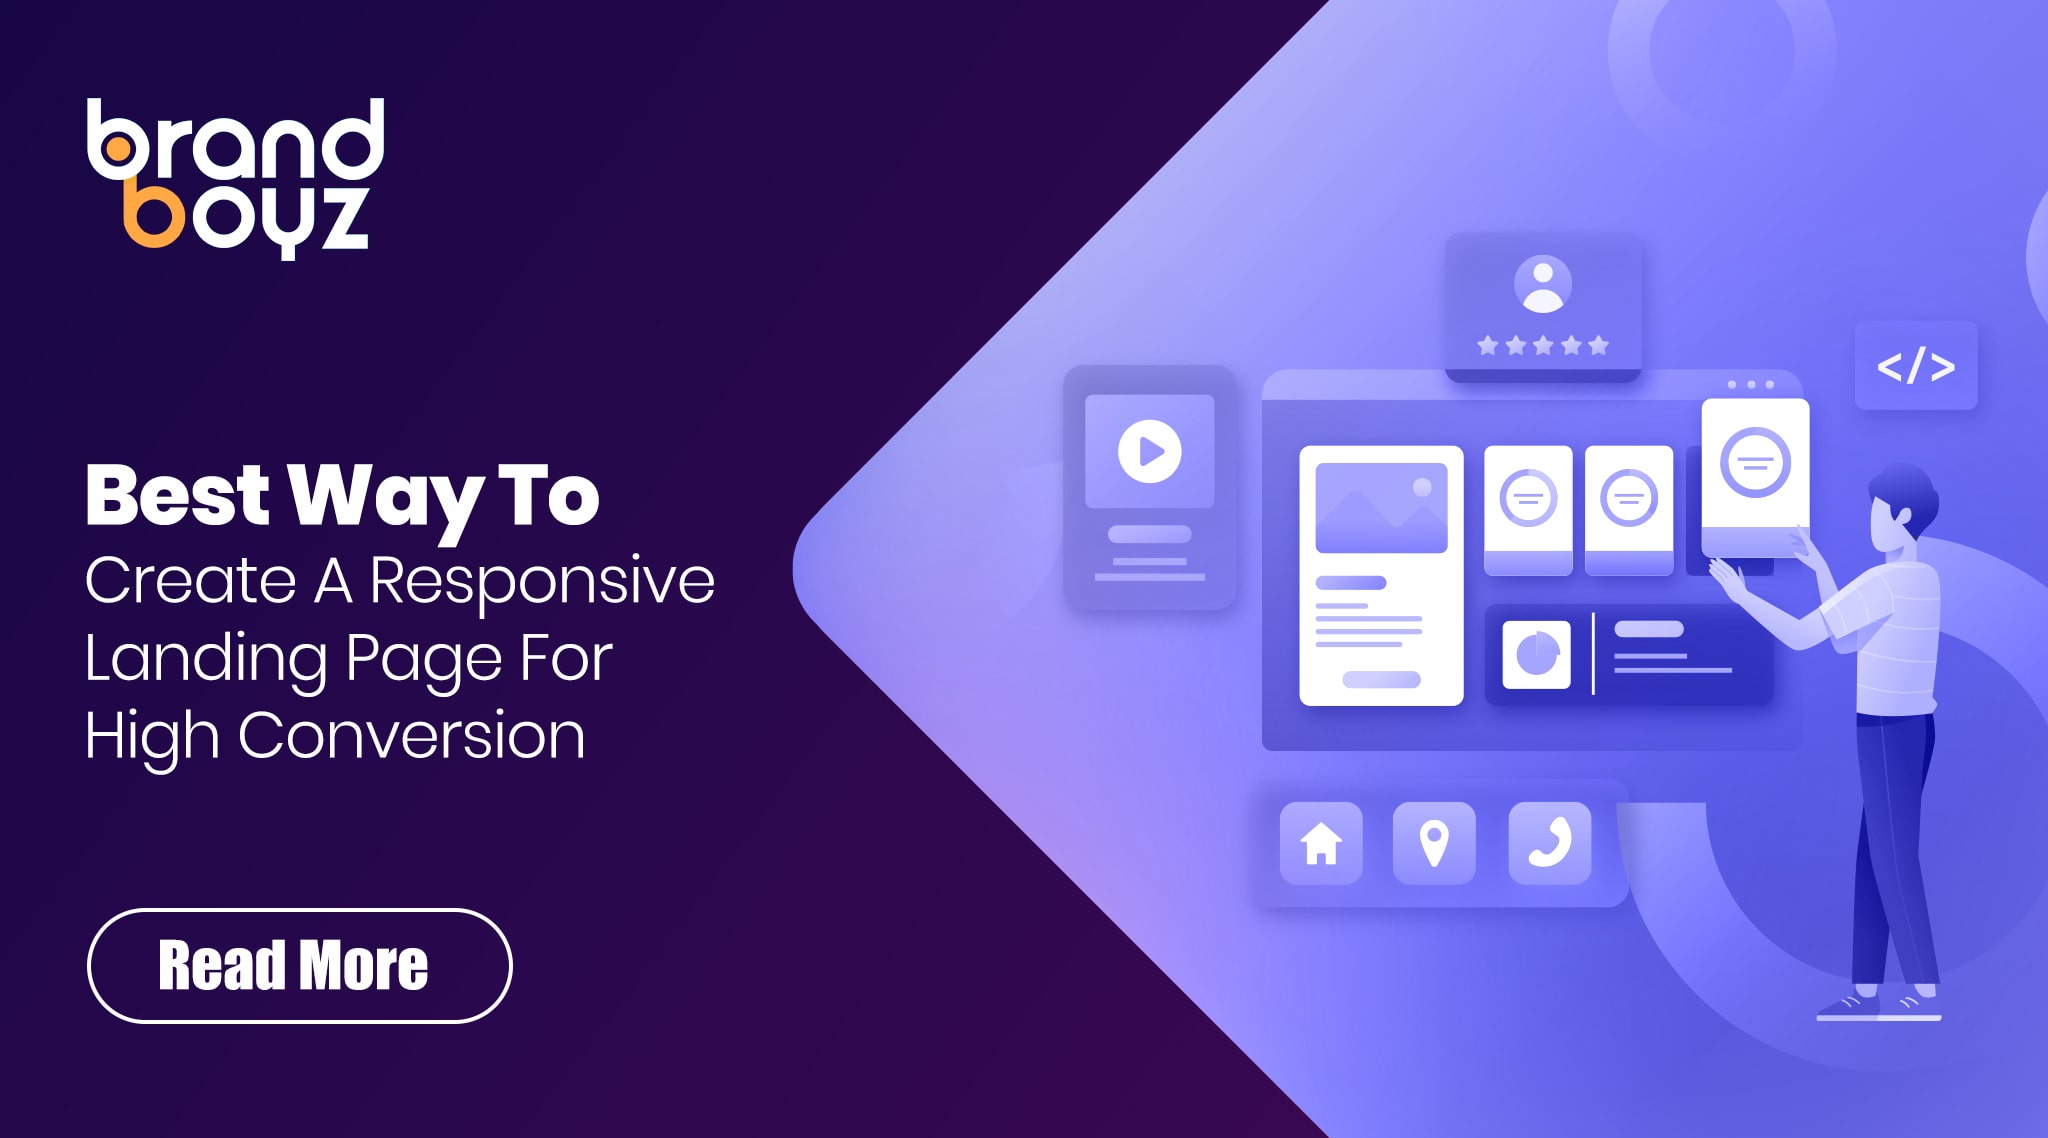 Best Way To Create A Responsive Landing Page For High Conversion